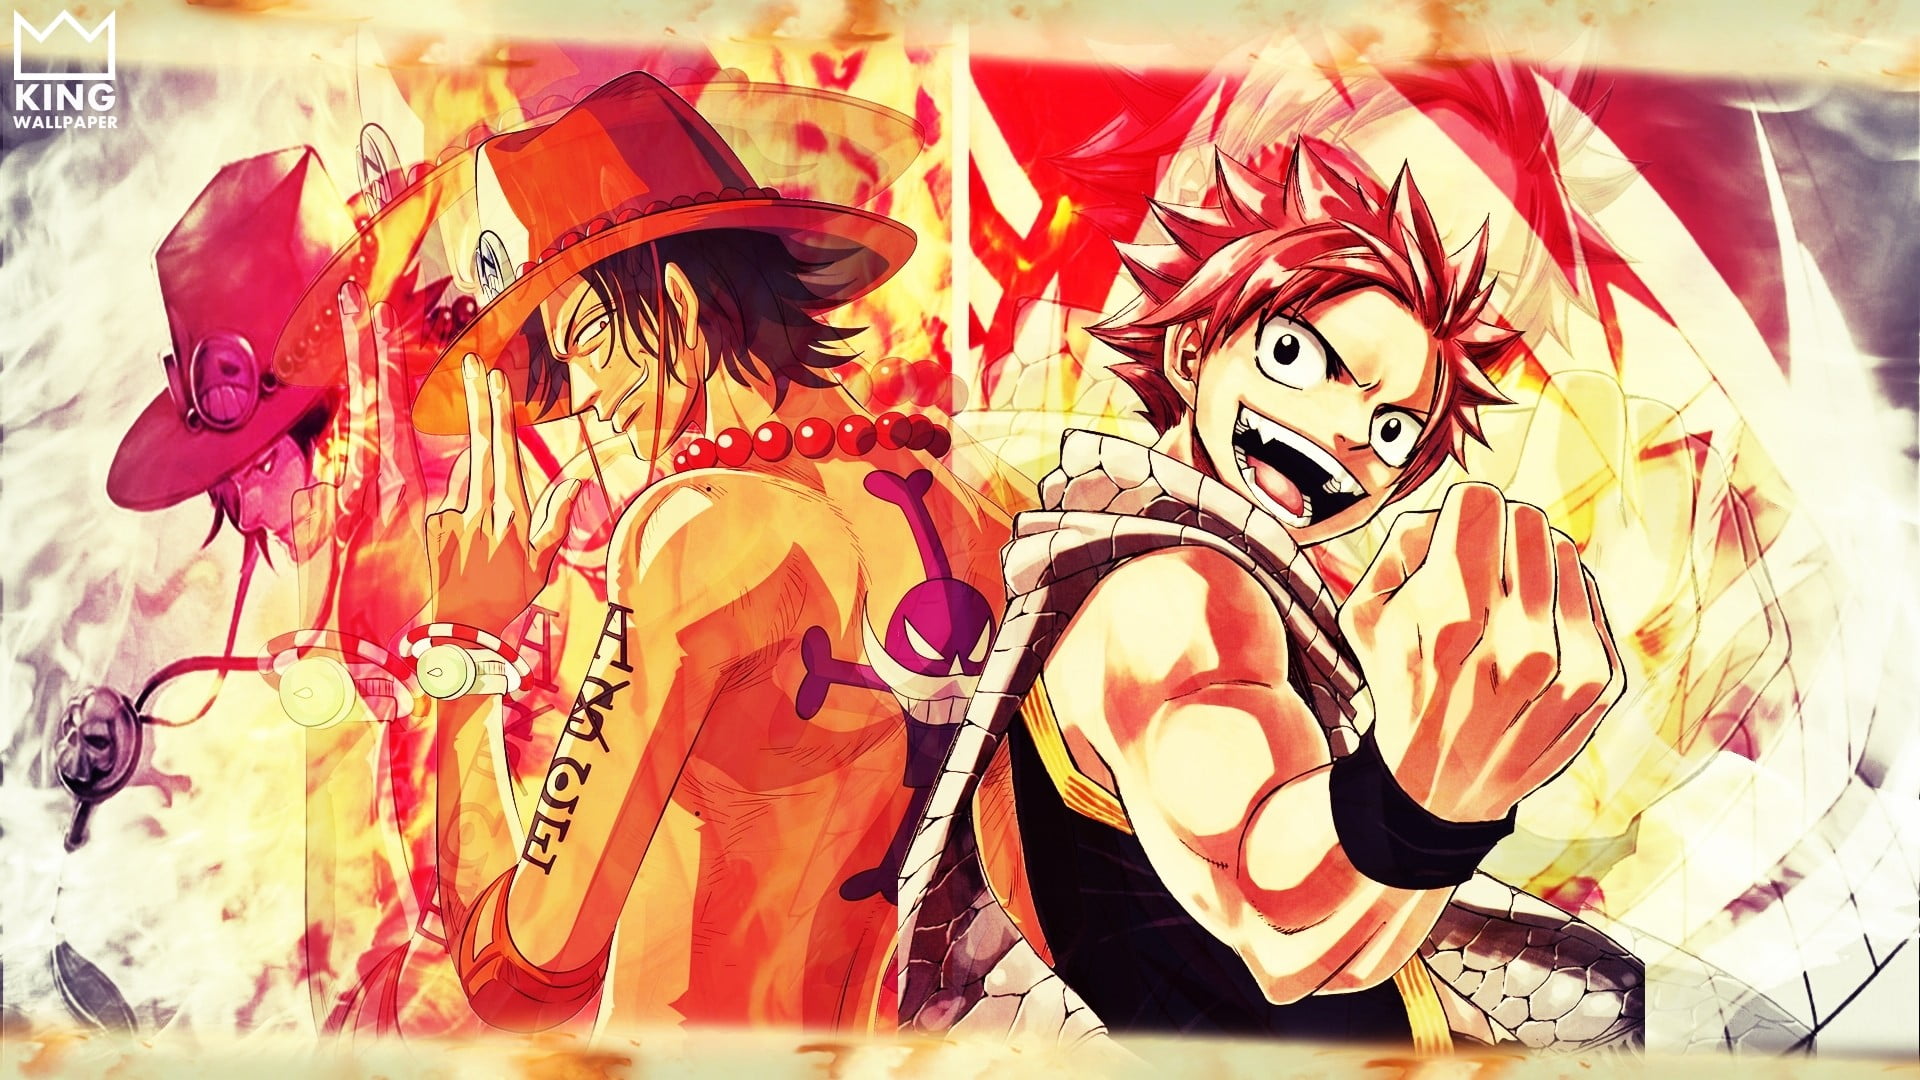 Natsu Dragneel and Portgas Ace poster, One Piece, Fairy Tail, Portgas D. Ace, Dragneel Natsu